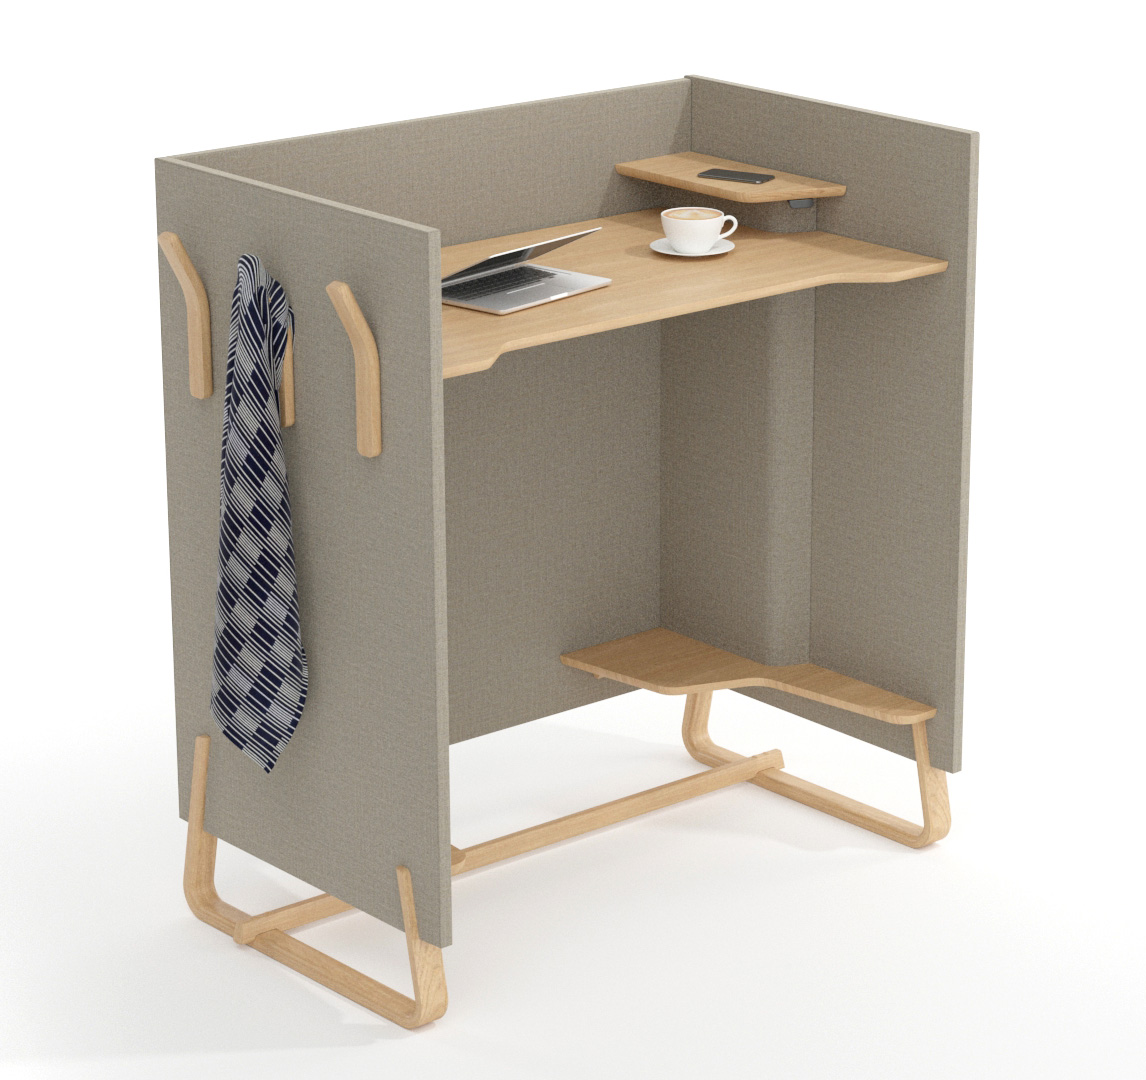 Theo Height Adjustable booth show at standing height with multiple storage options. With oak legs.